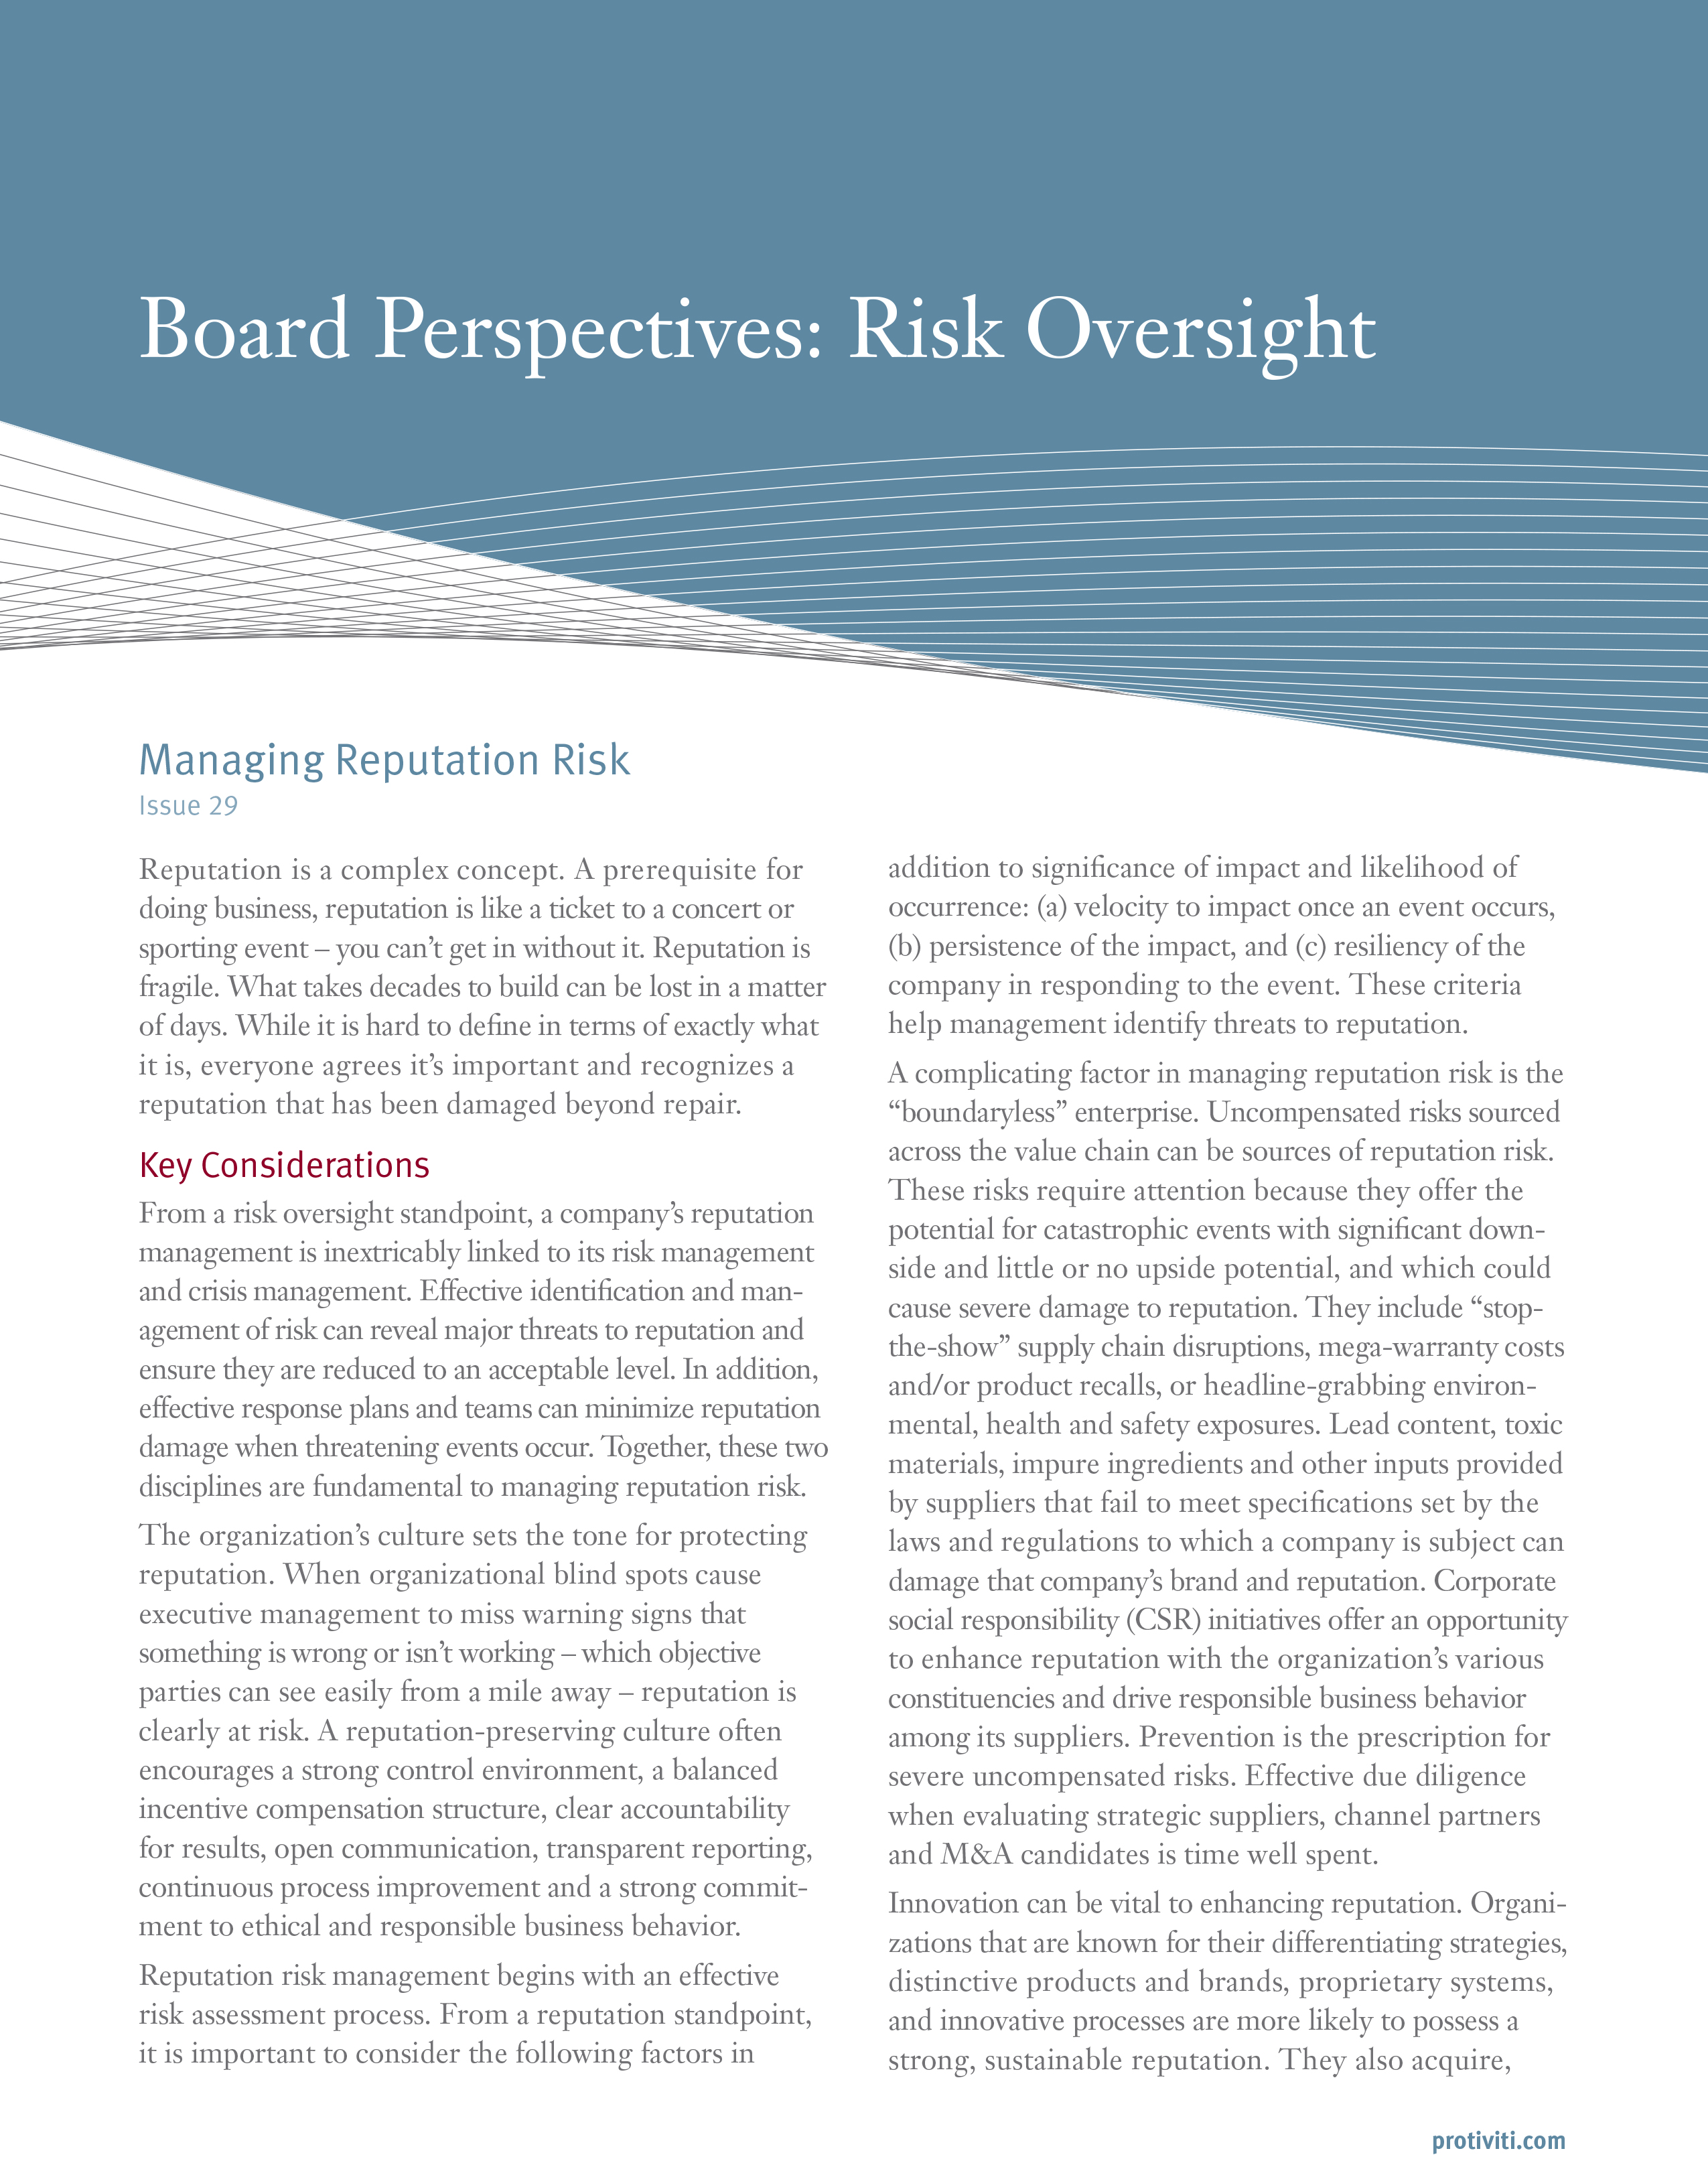 Screenshot of the first page of Managing Reputation Risk.